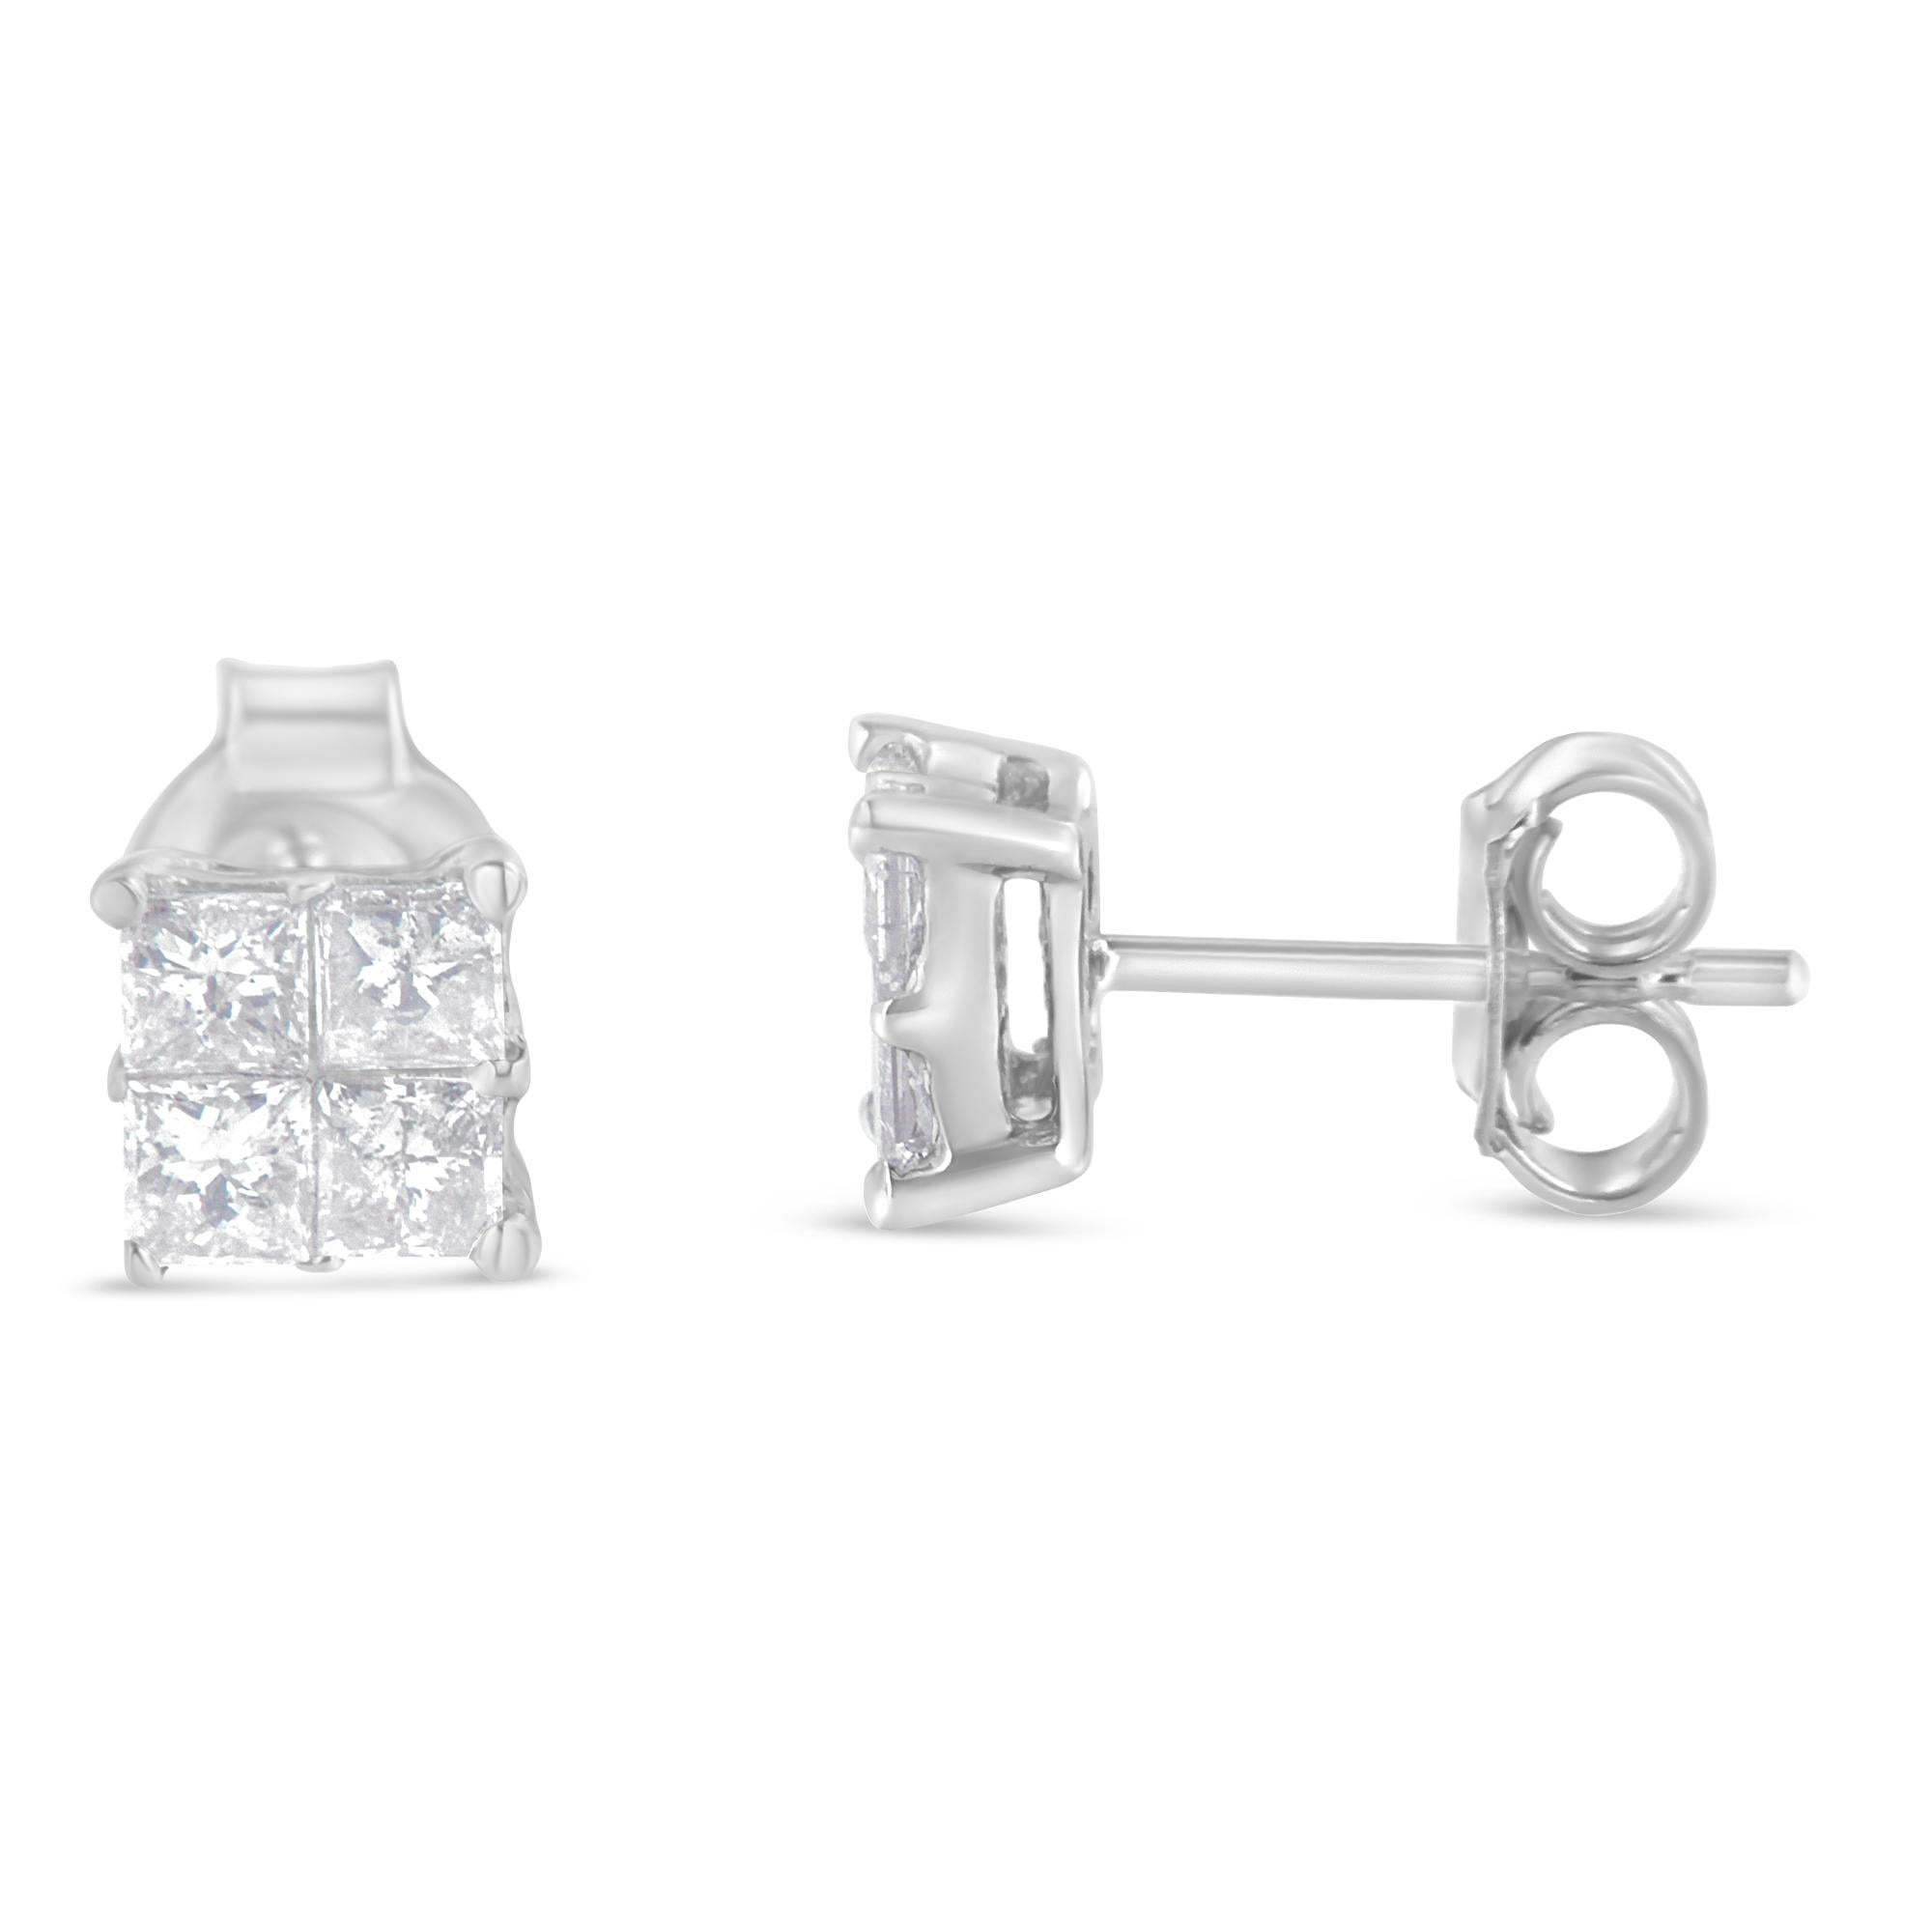 Elegant stud earrings made with the purest 10k white gold and genuine diamonds. This marvelous piece includes 8 princess shaped diamonds with an invisible setting. They fill out most of the white gold classic squared design formed by 4 diamonds in